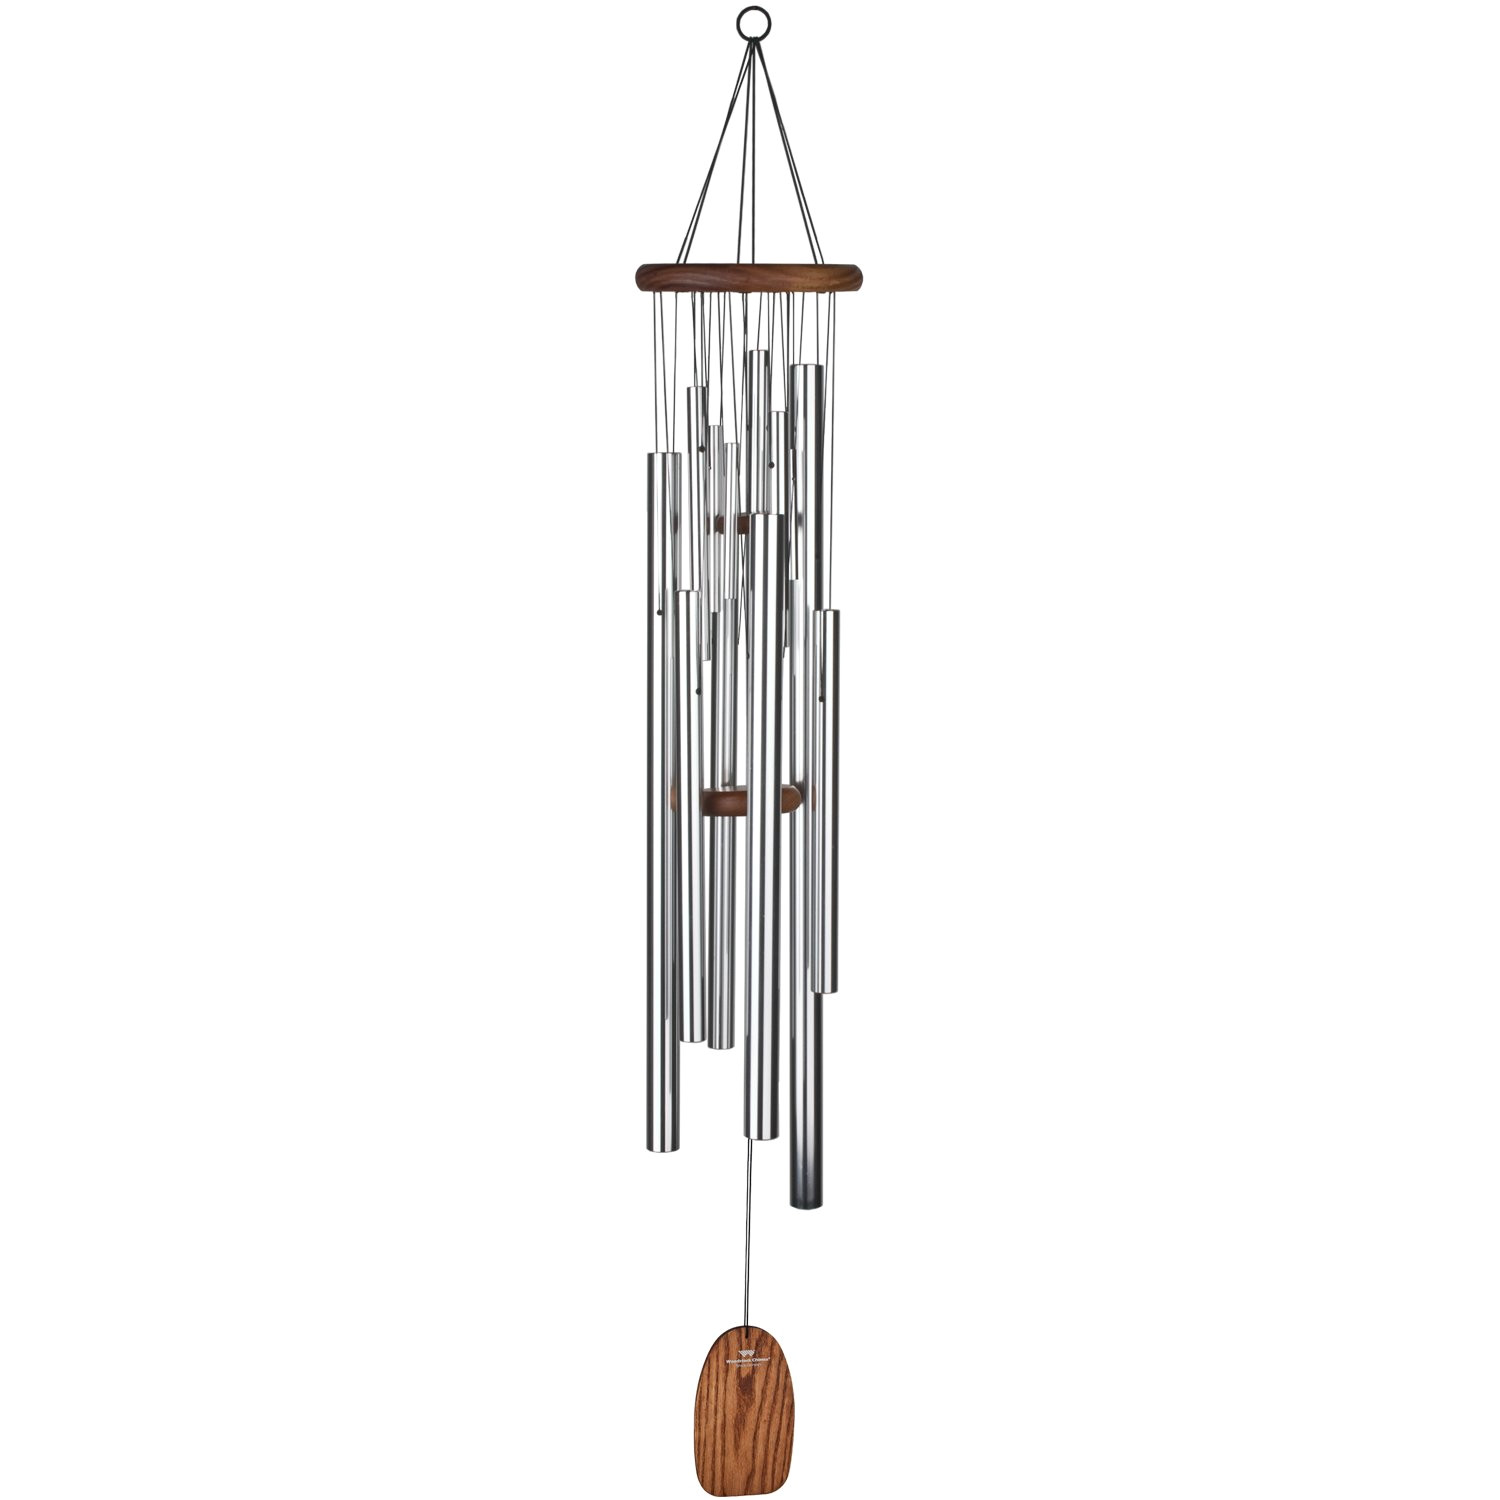 amazon com woodstock chimes mmso magical mystery chime 55 inch space oddyssey wind bells garden outdoor